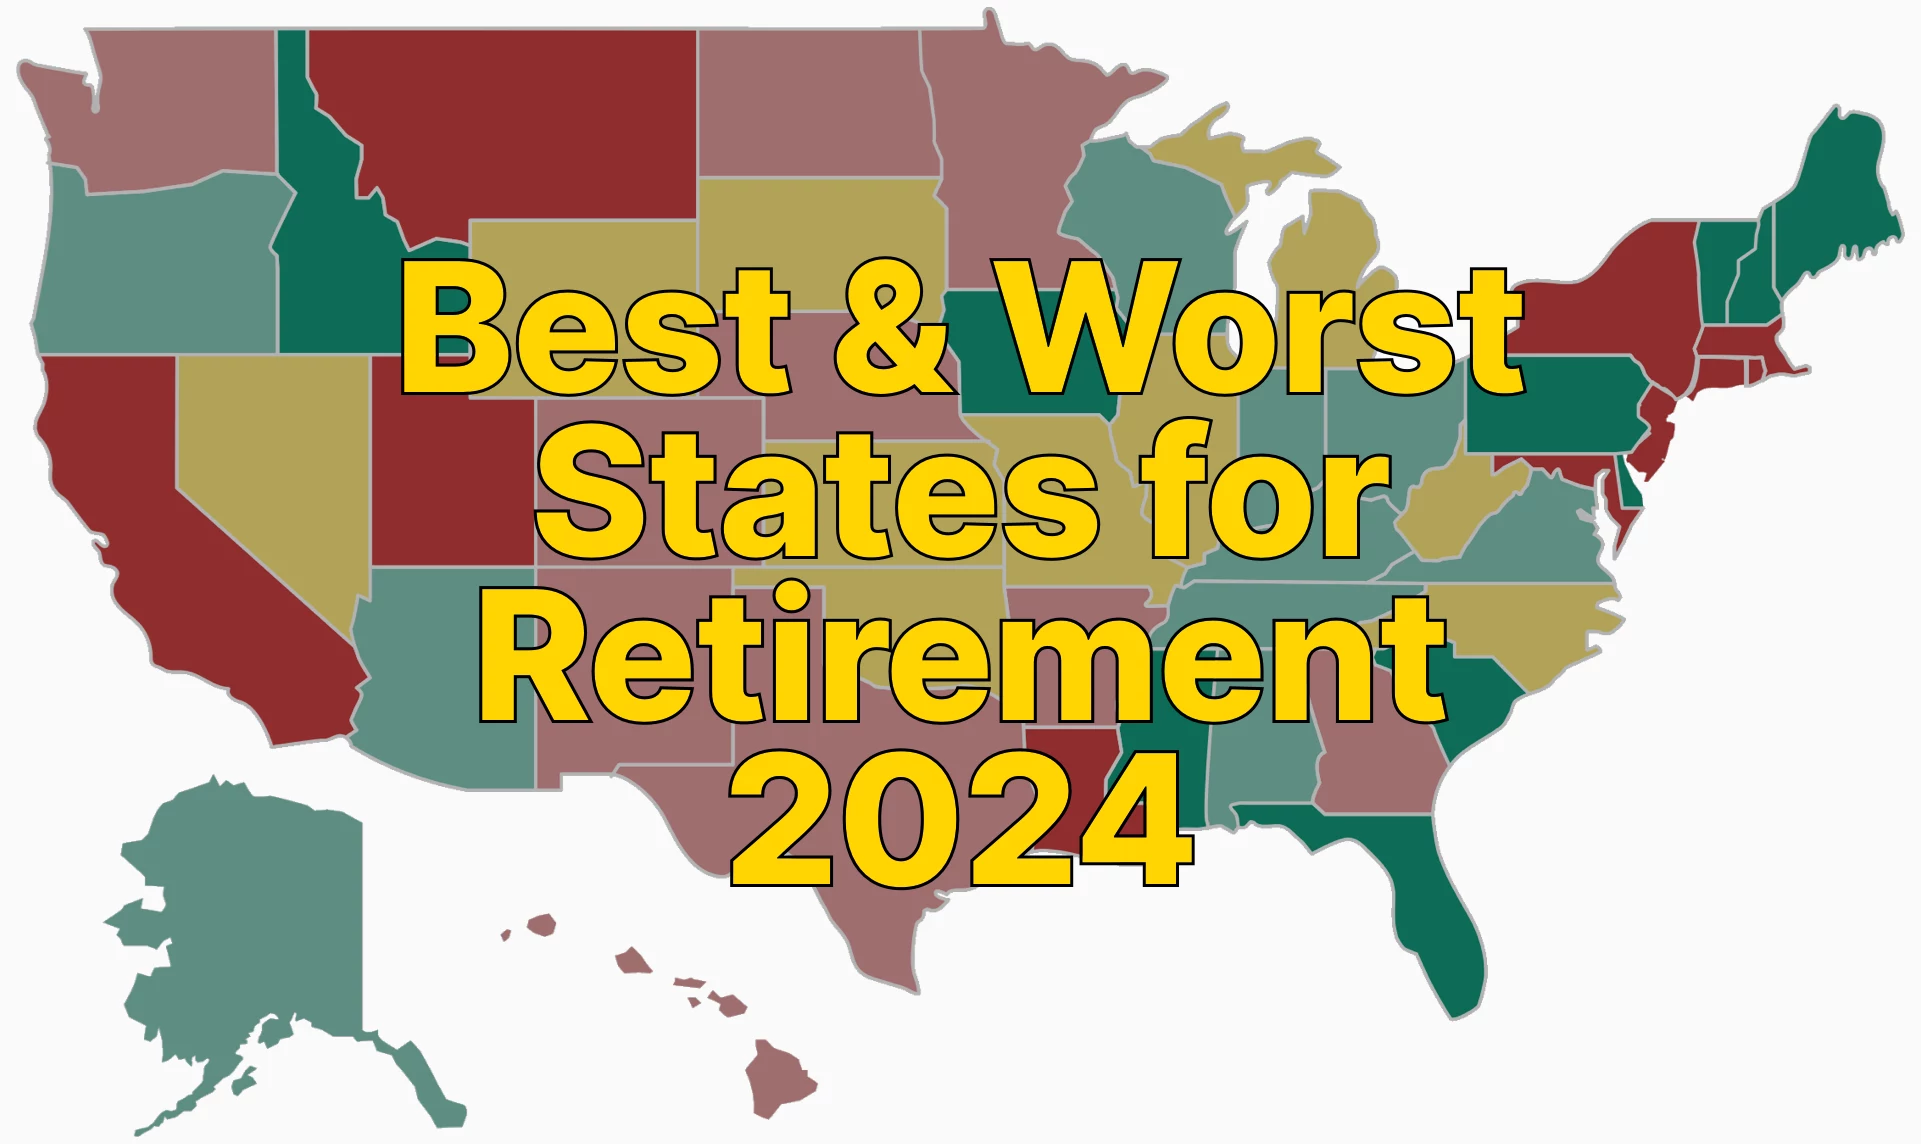 Best and Worst States for Retirement 2024